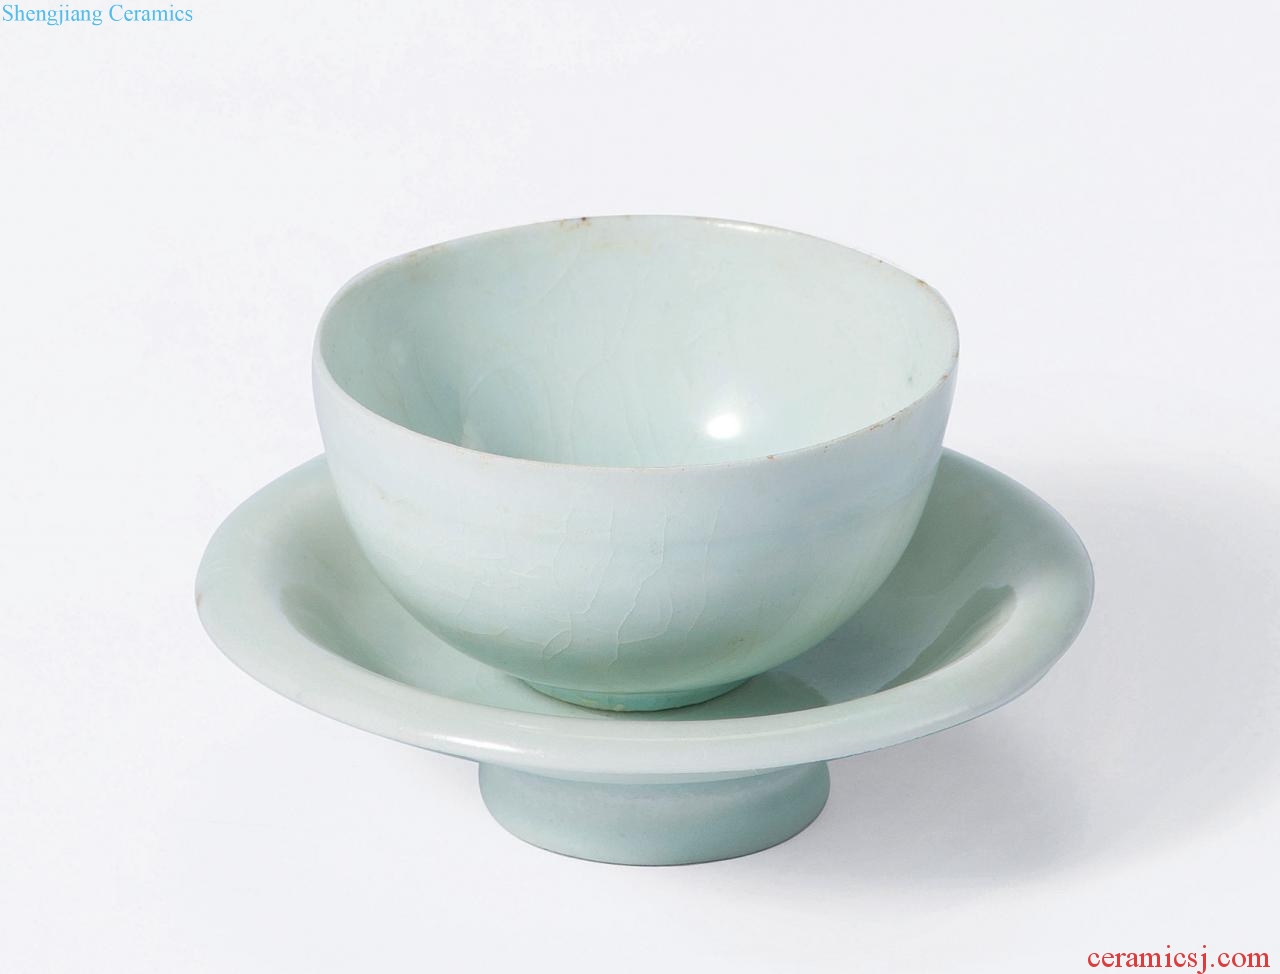 Northern song dynasty (960-1127), green white glaze tor cup (a)